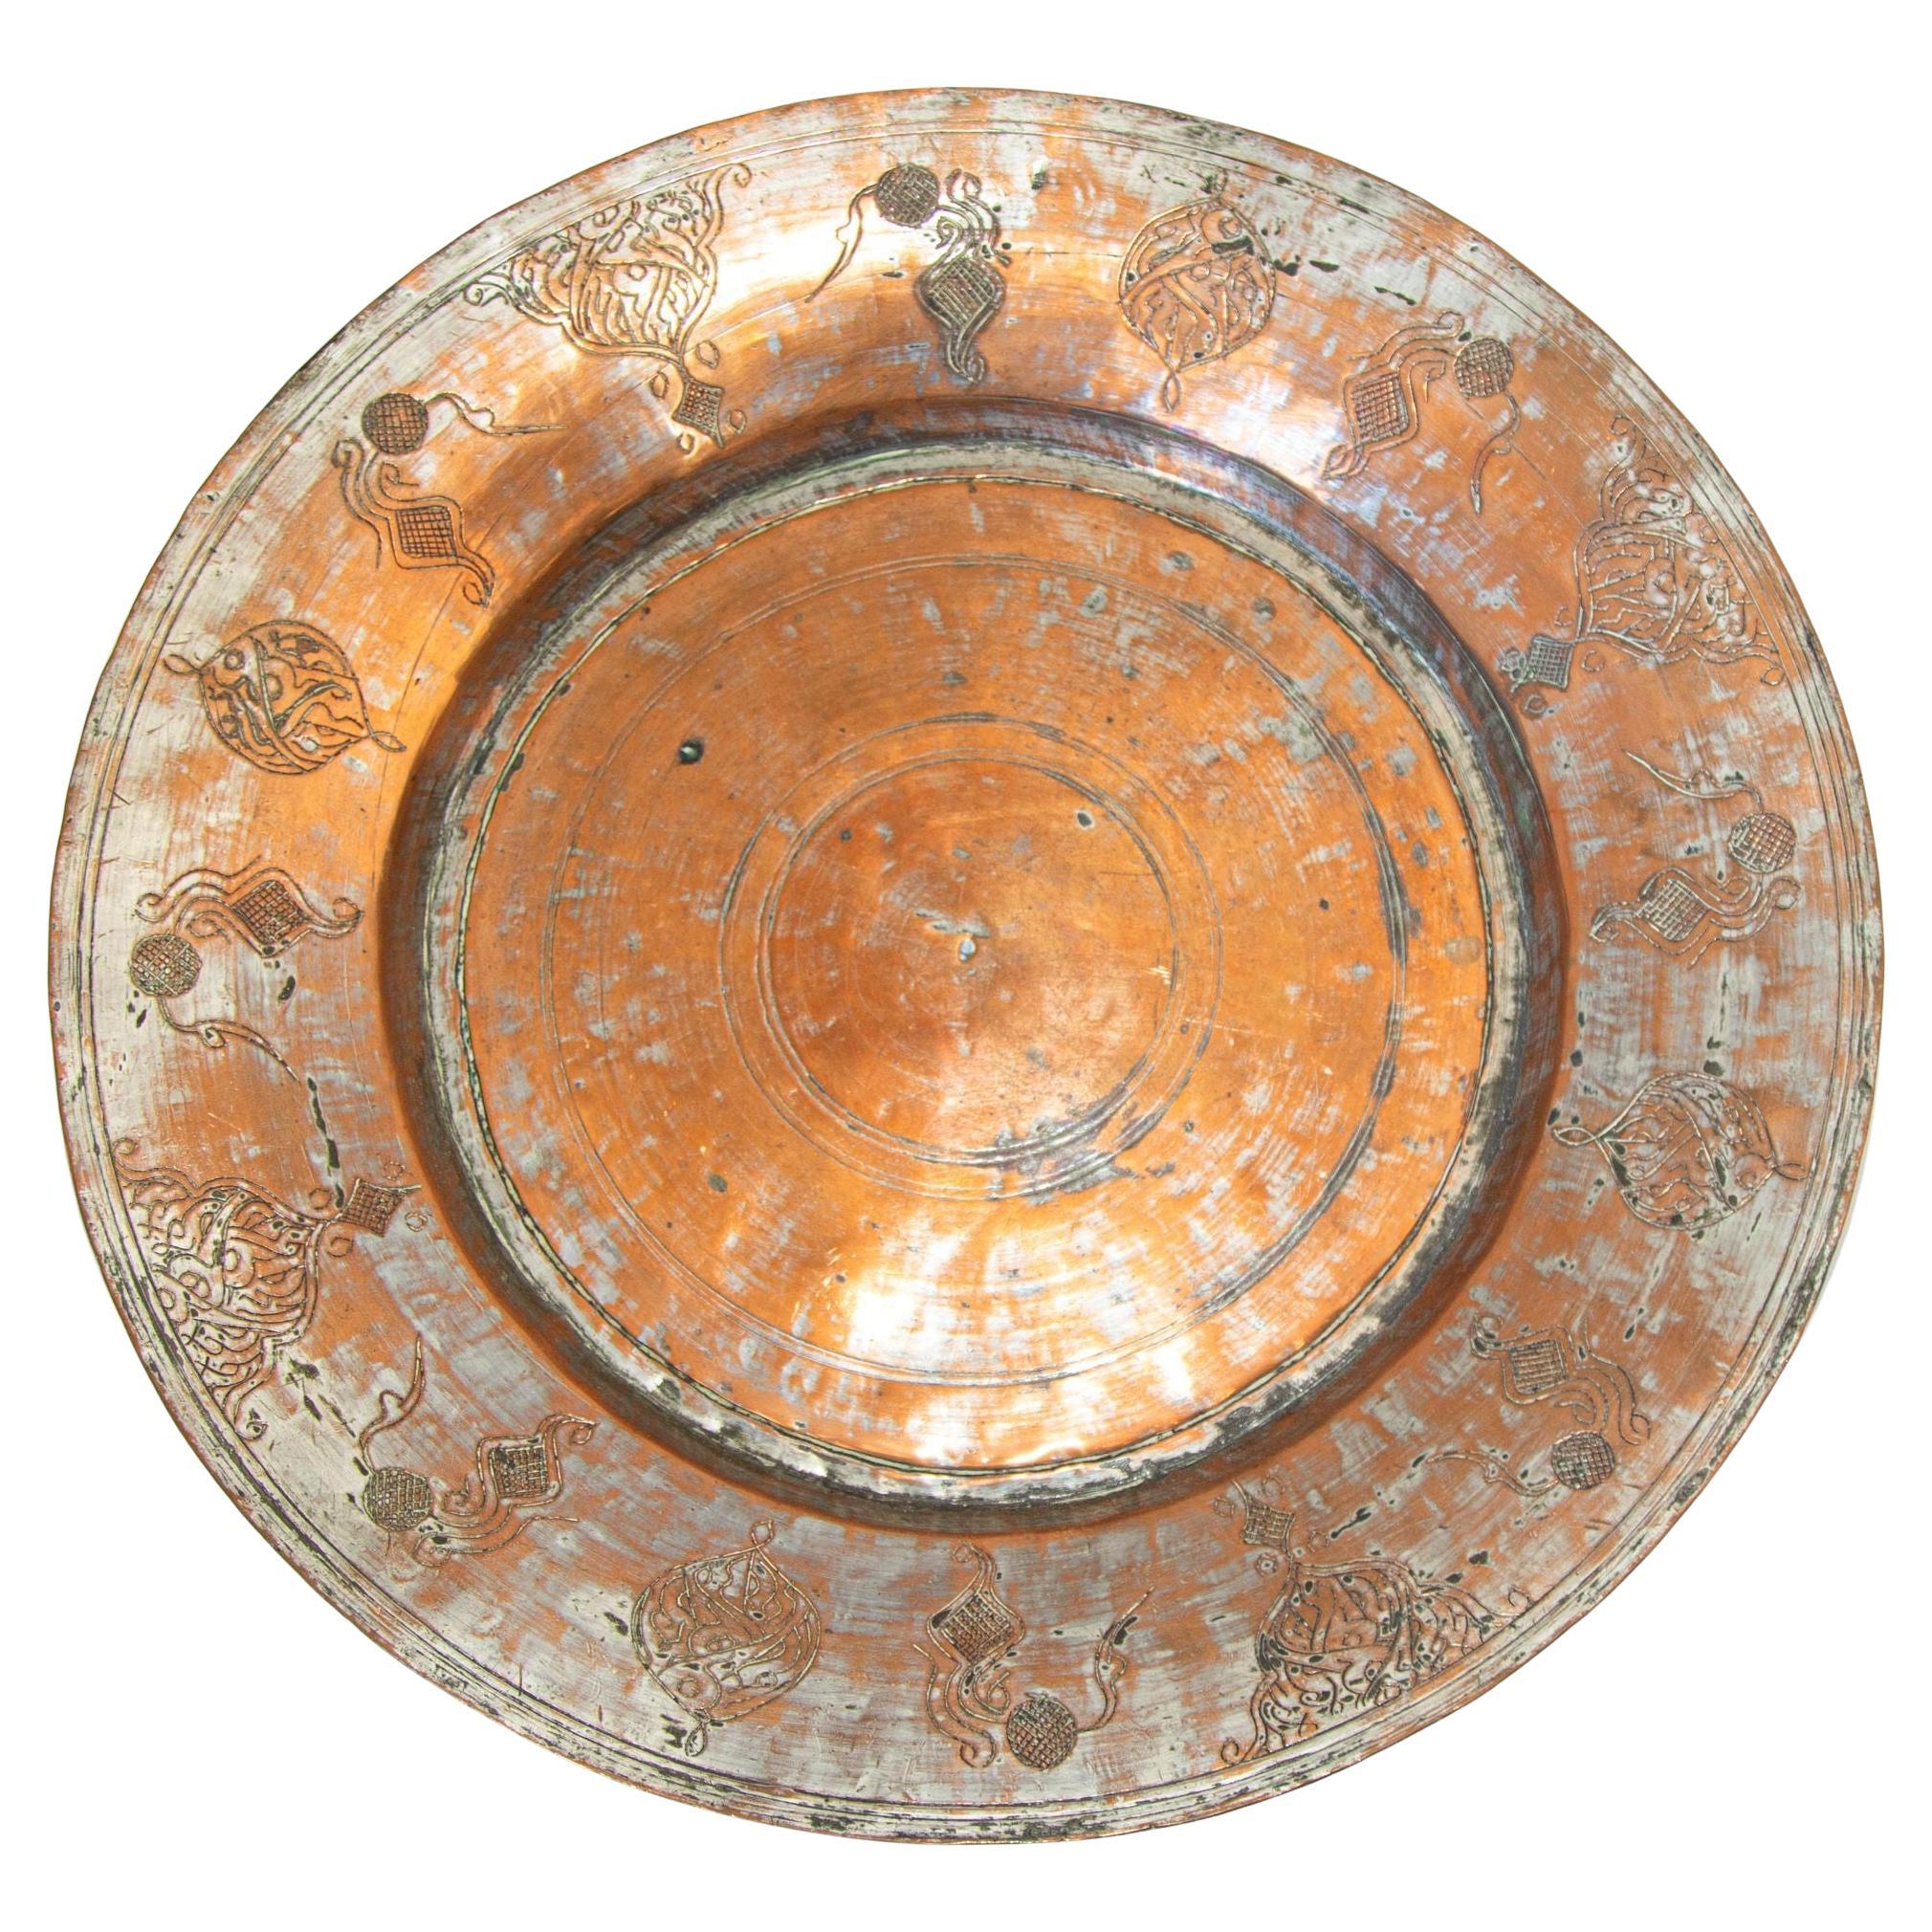 Large Antique Tinned Copper Rajasthani Vessel Bowl